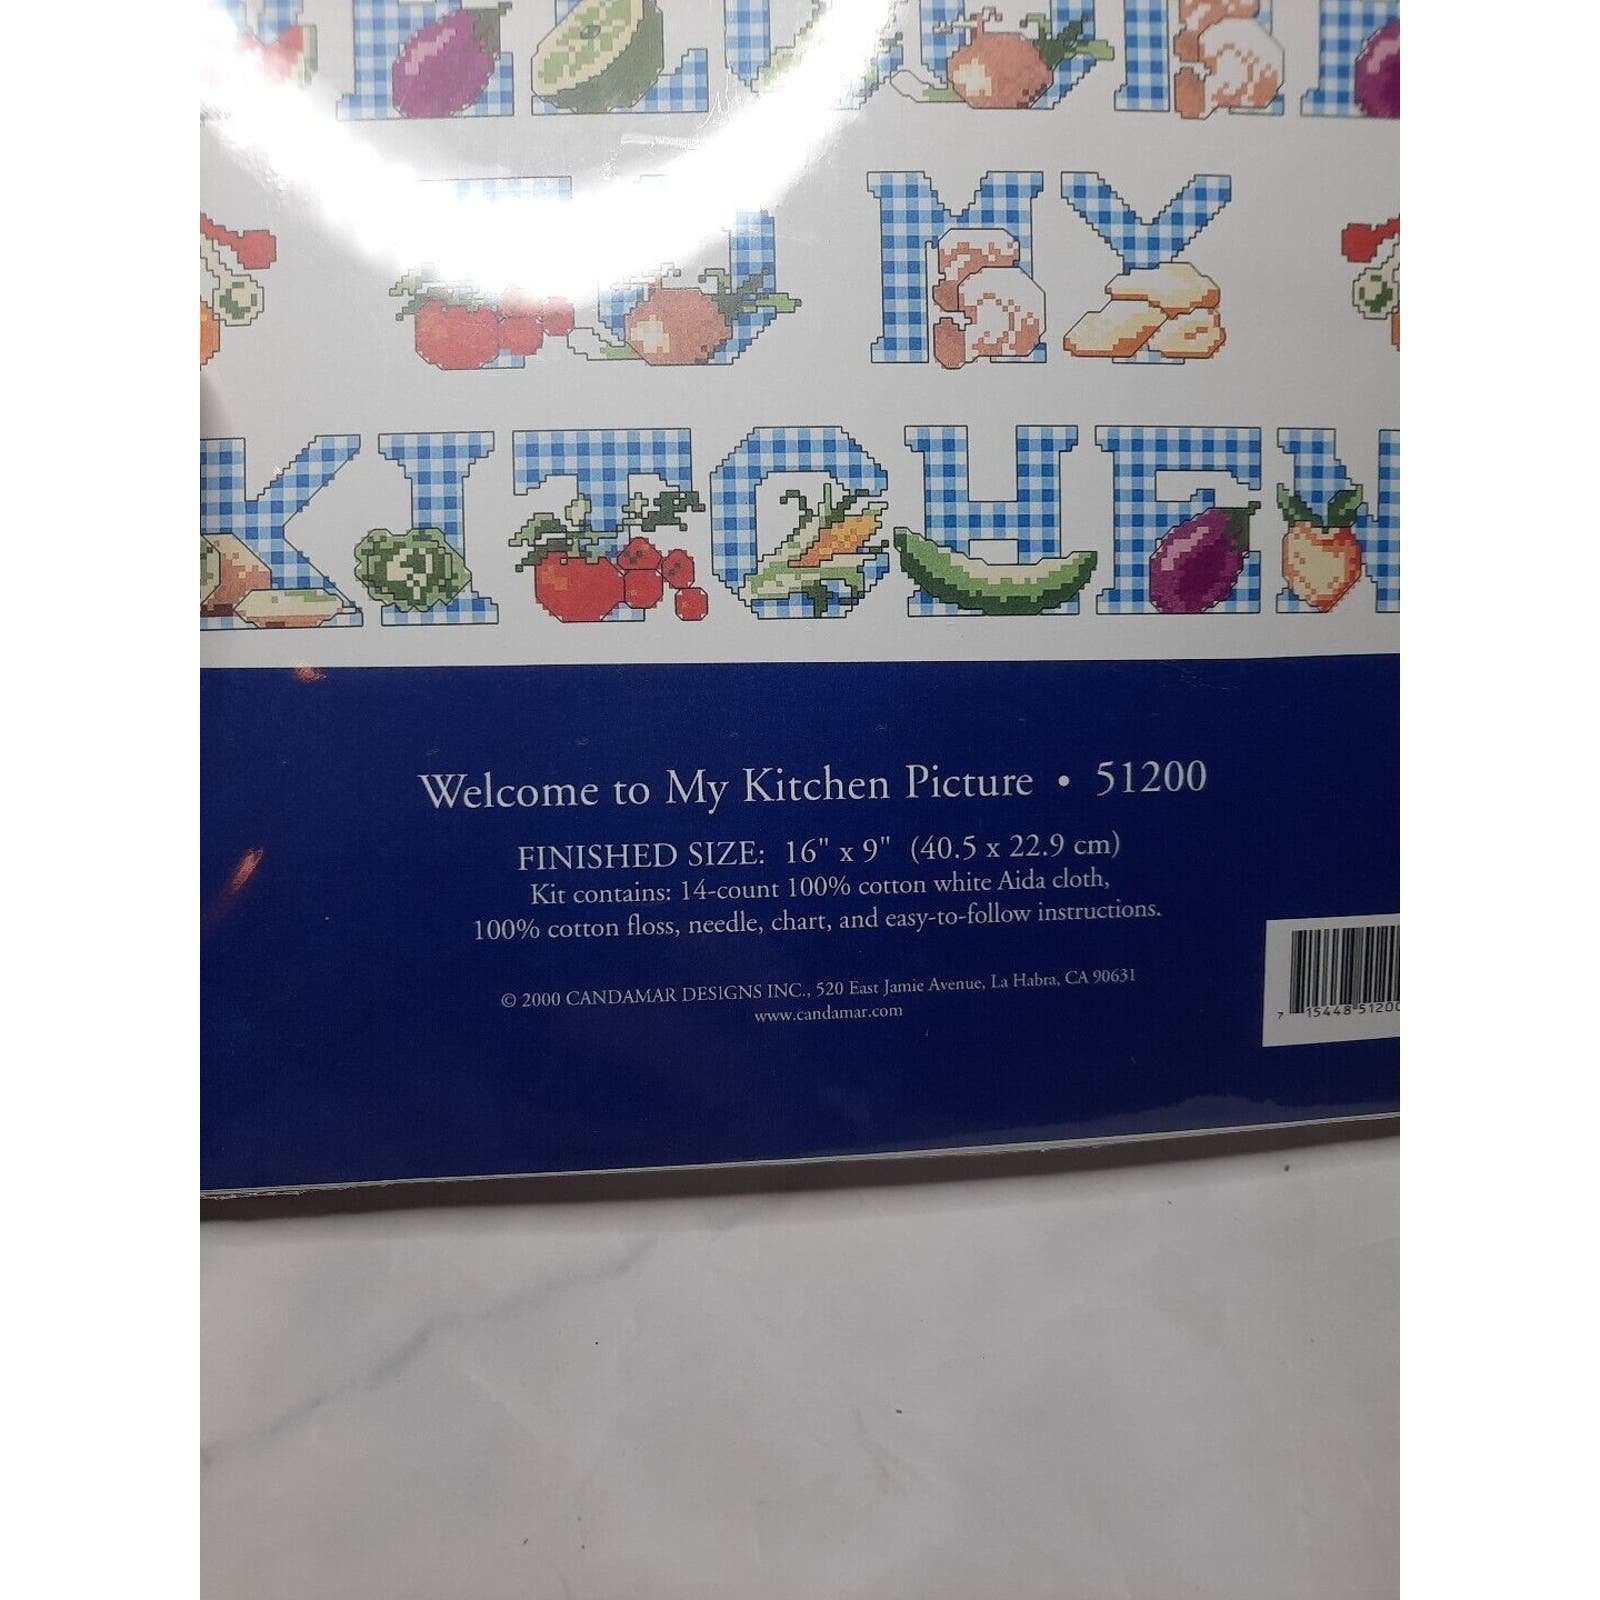 Candamar Counted Cross Stitch Kit Welcome to My Kitchen Picture 51200 16x9 Dje4Q19DY